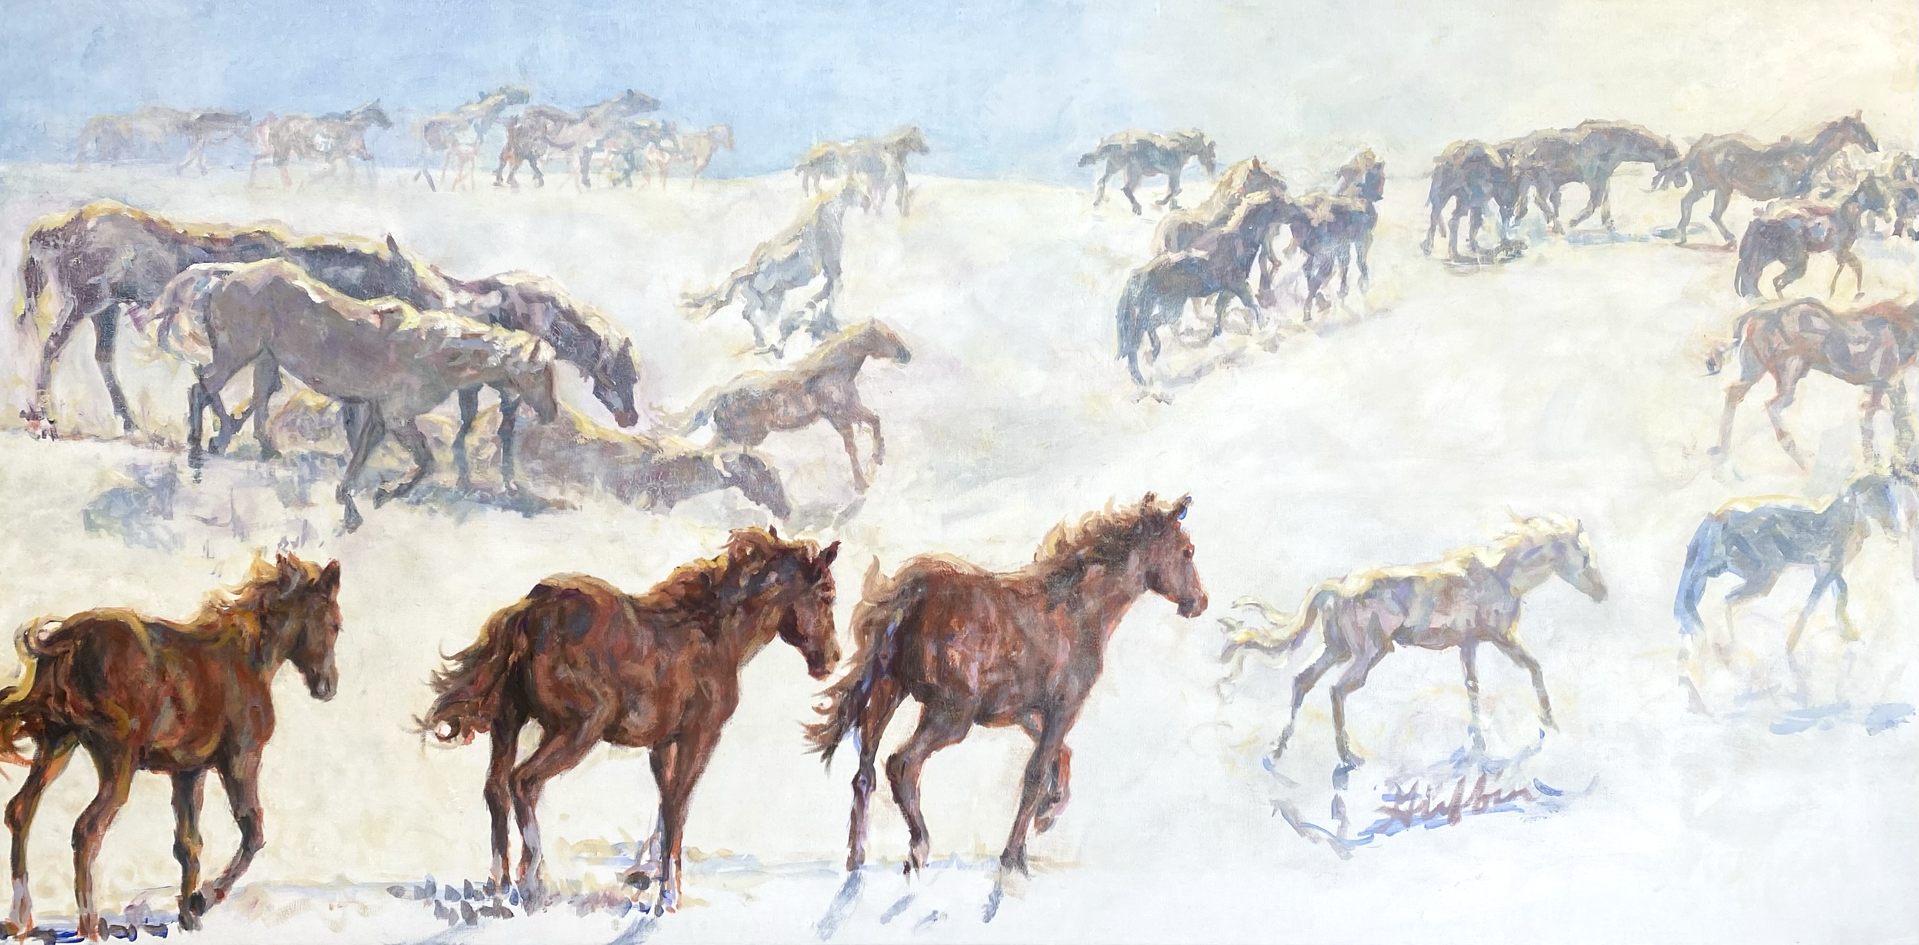 When We Were Horses by Patricia A. Griffin